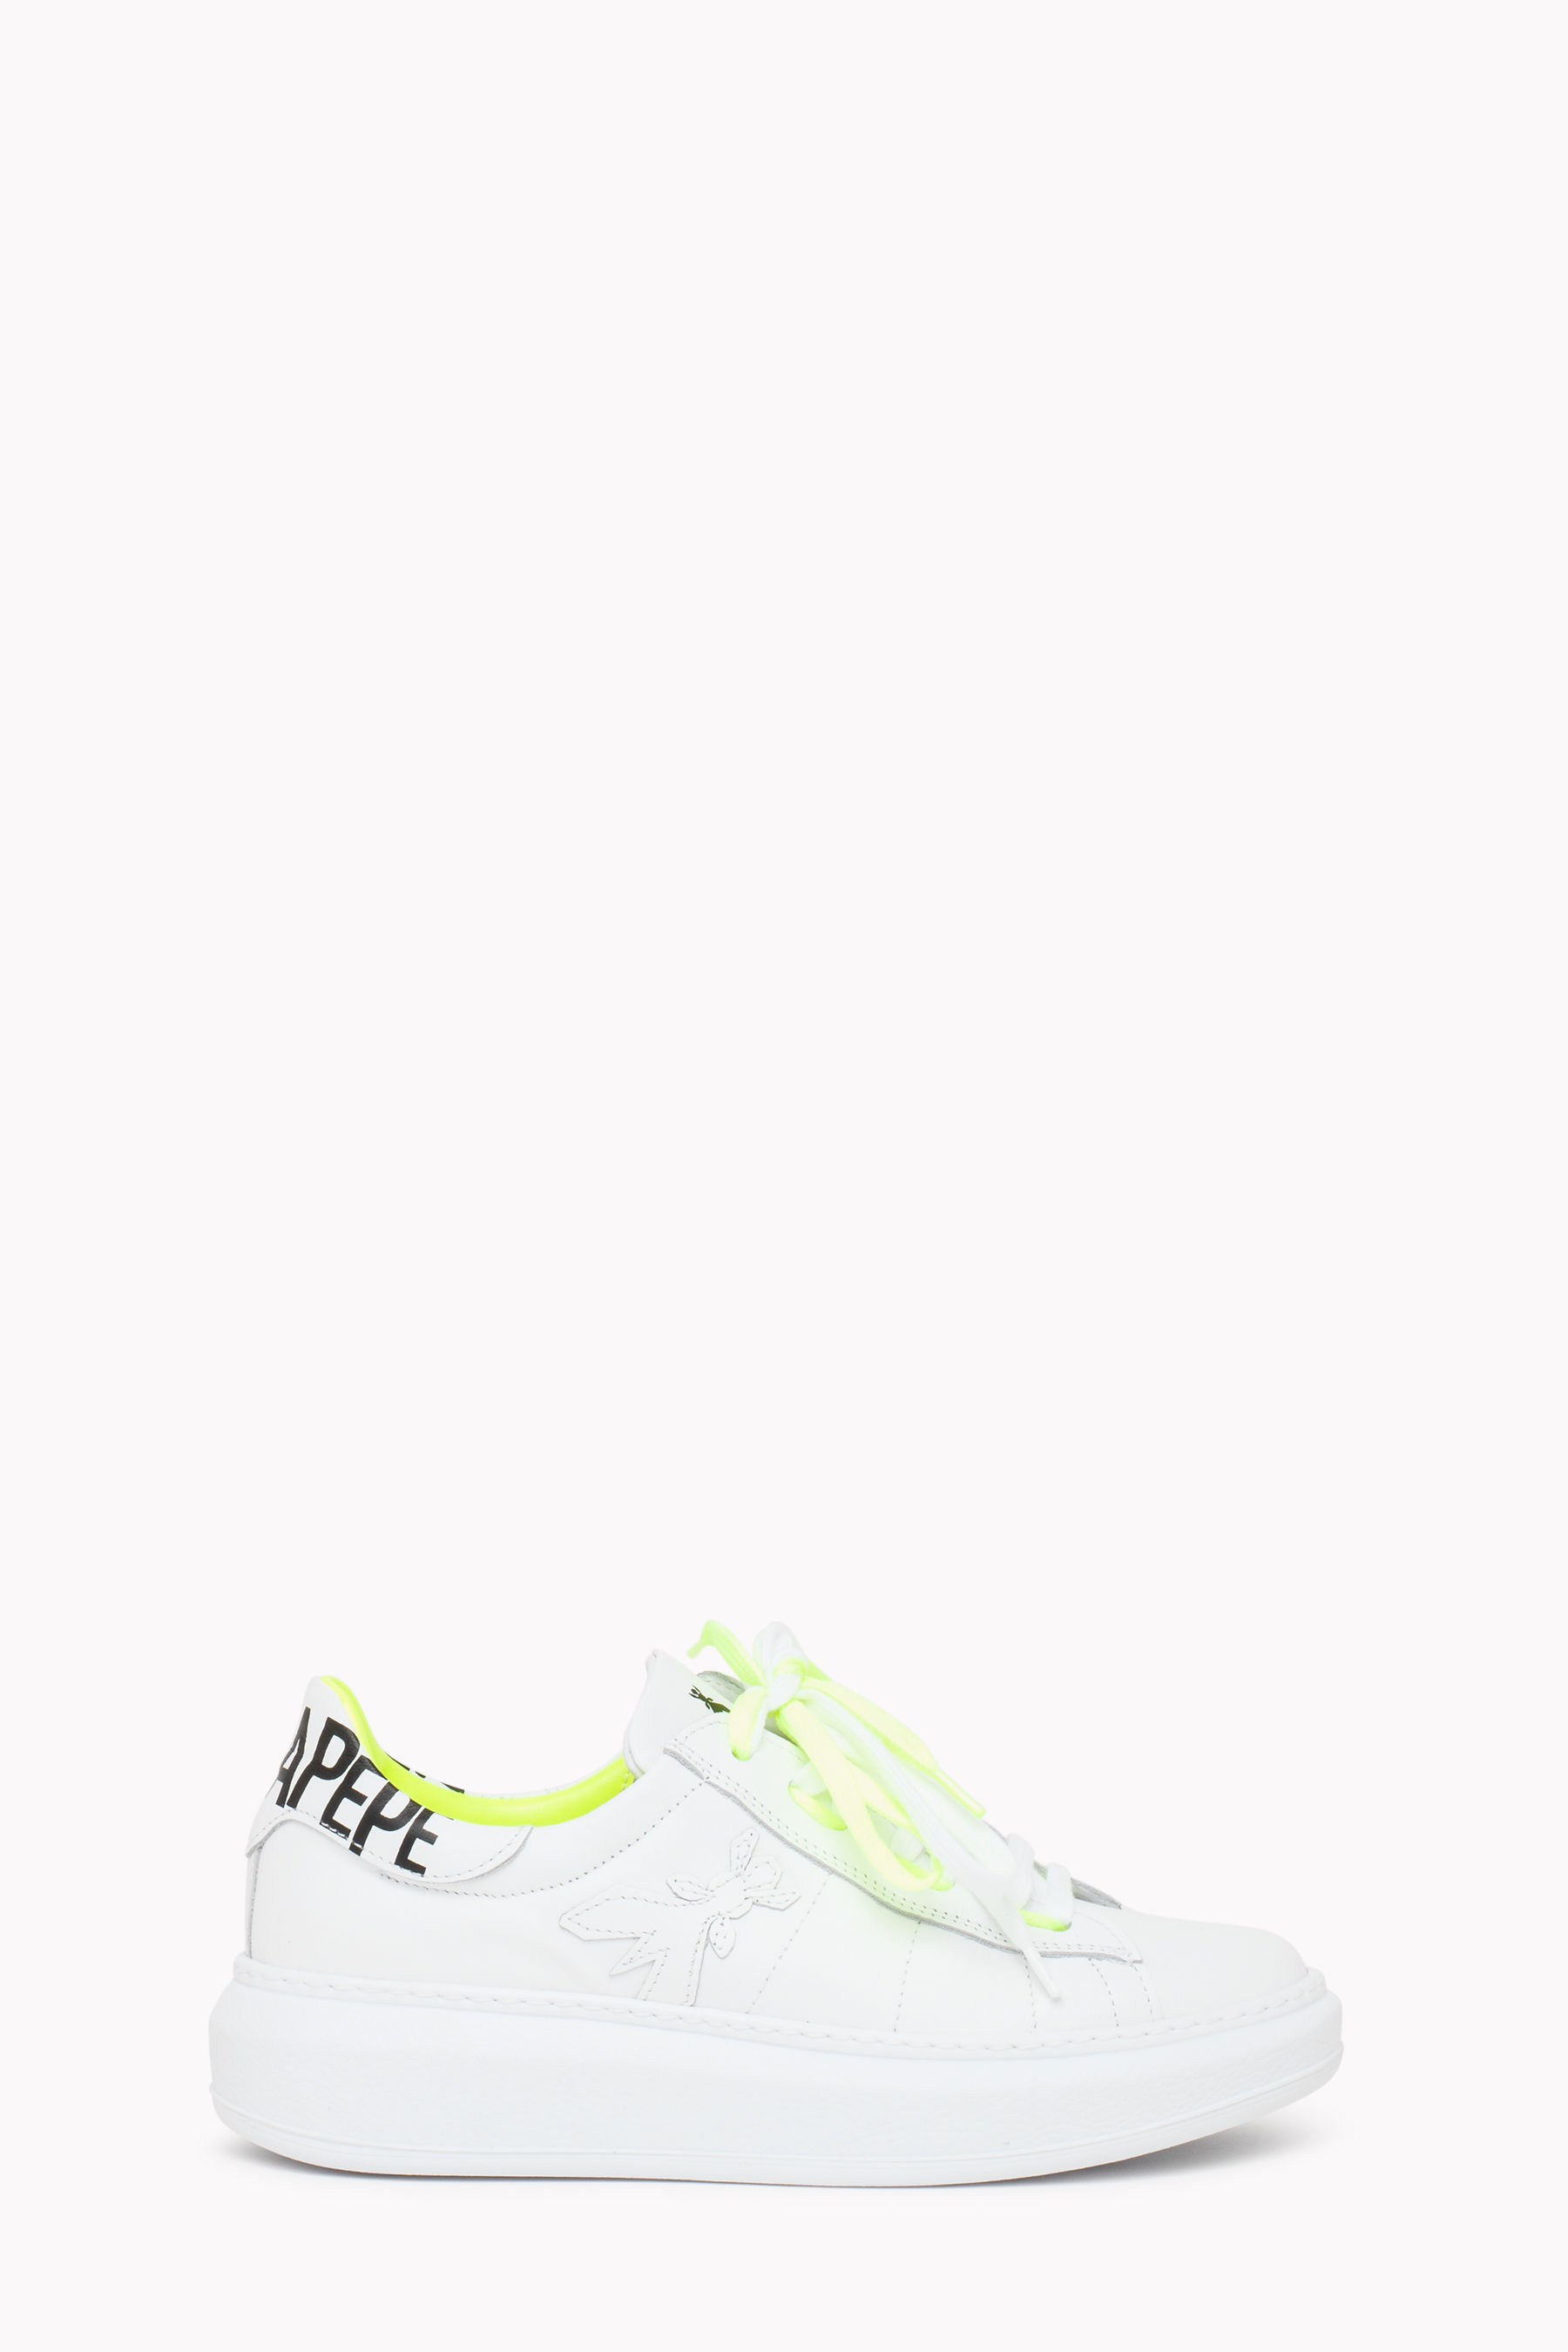 pepe shoes on line